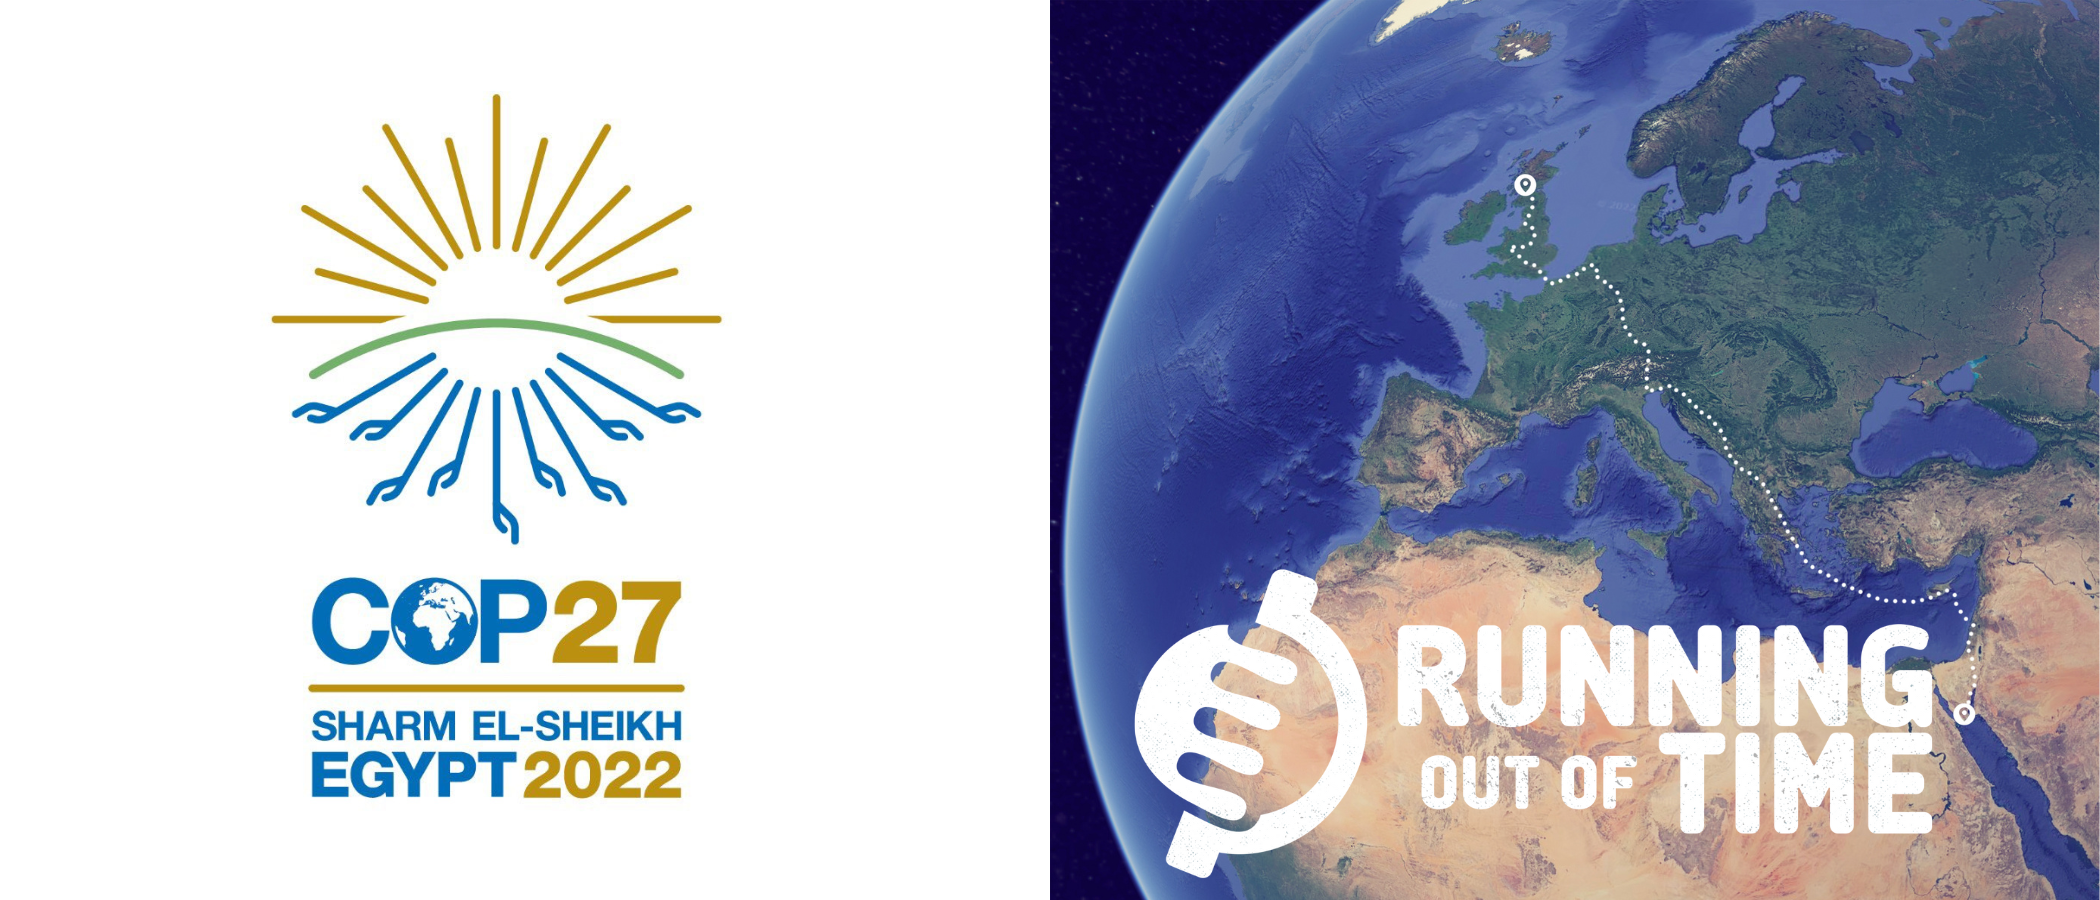 COP27 logo and the relay baton route on a globe with the Running out of Time logo